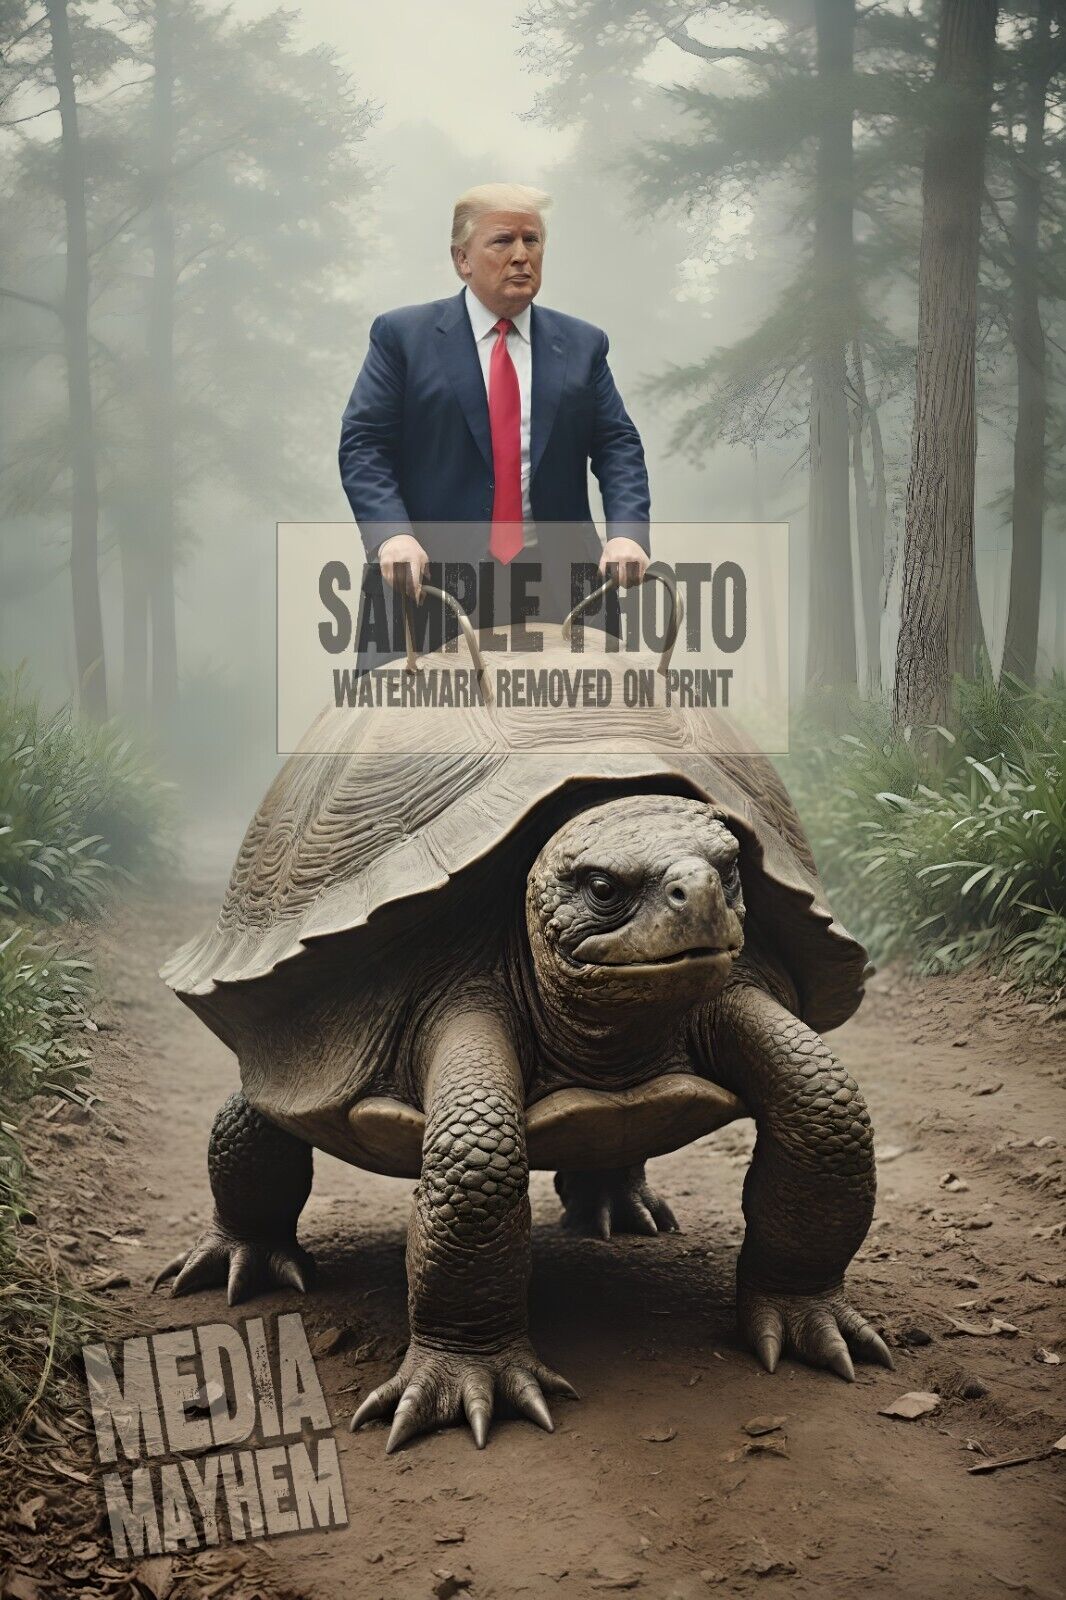 Donald Trump riding large Turtle in Forest Art Print 4x6 Trump Photo #100